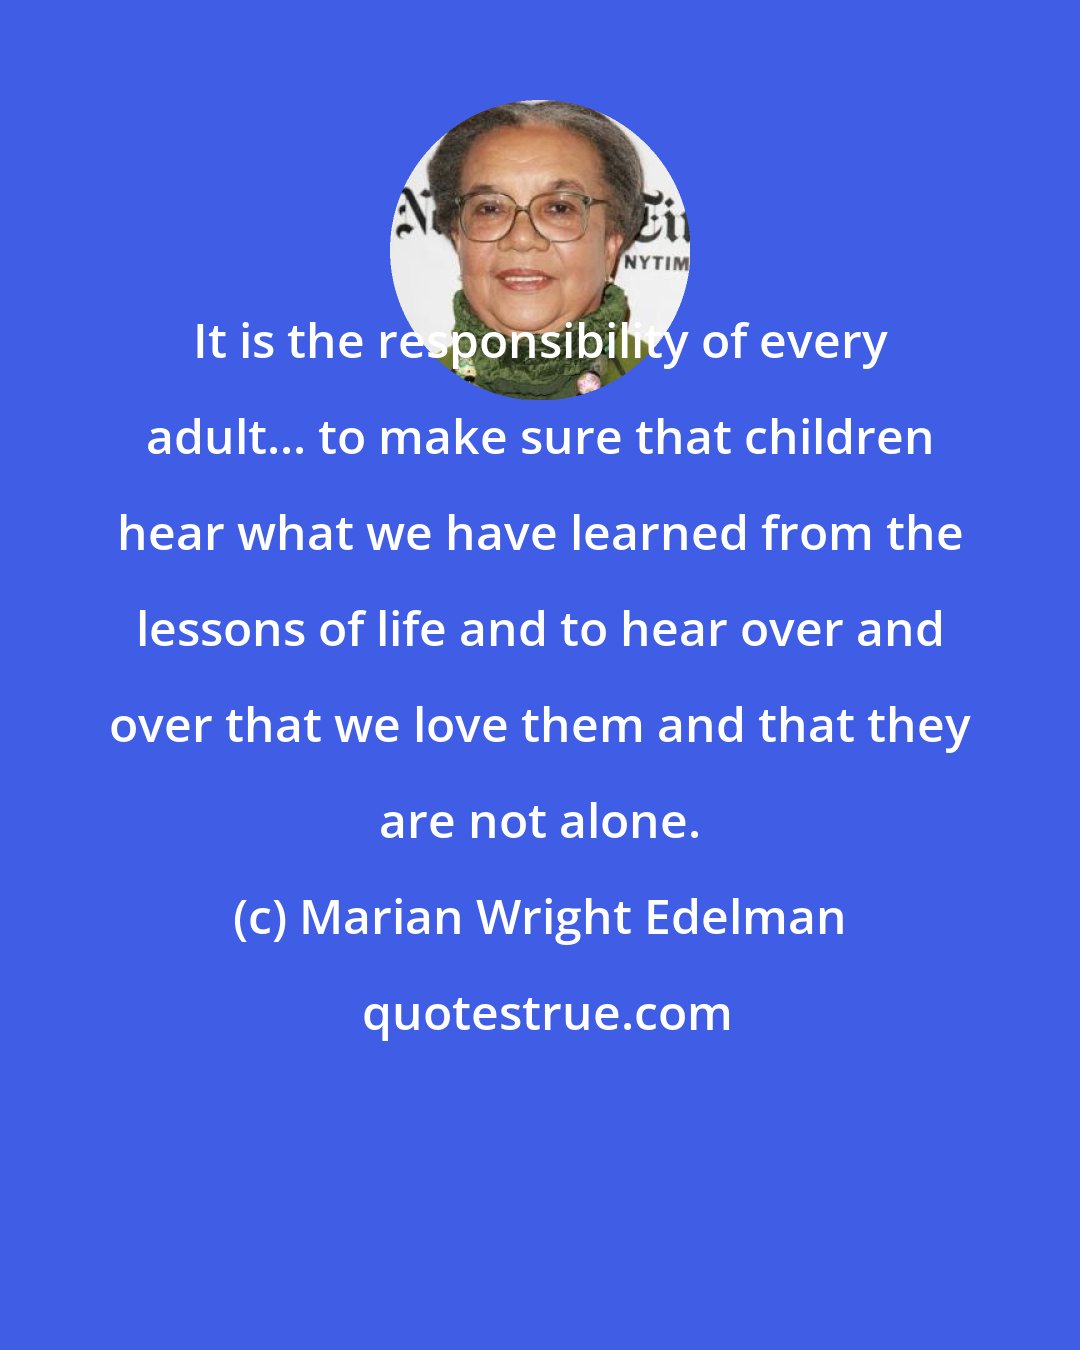 Marian Wright Edelman: It is the responsibility of every adult... to make sure that children hear what we have learned from the lessons of life and to hear over and over that we love them and that they are not alone.